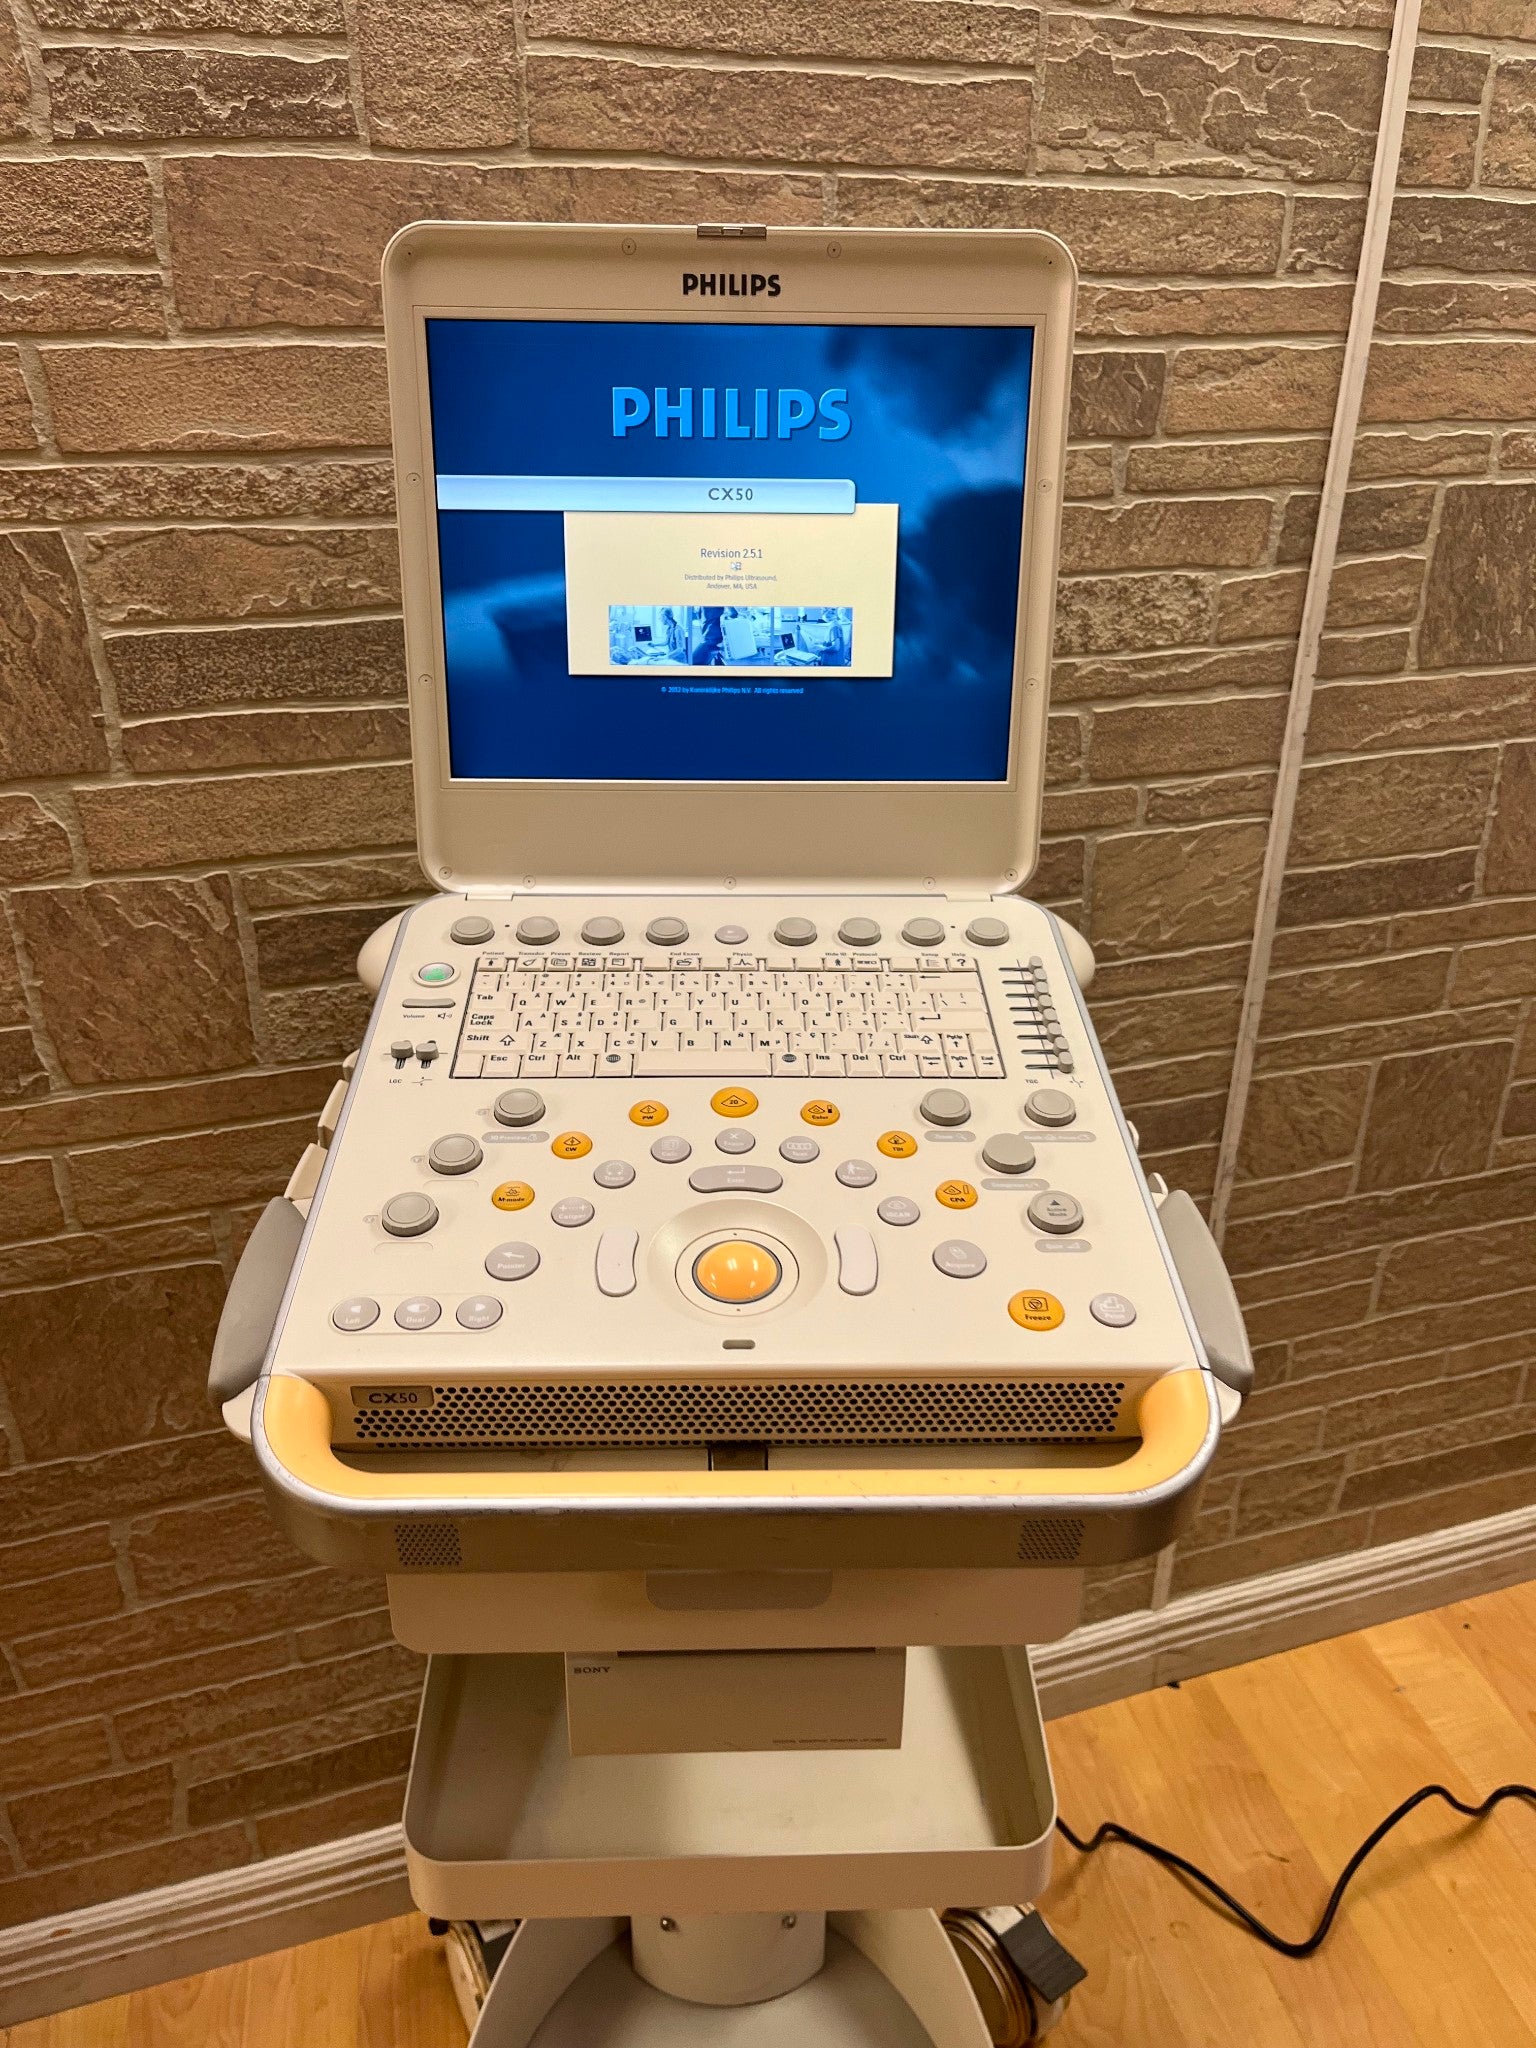 Philips CX50 Ultrasound Scanner Machine 2011 with cart DIAGNOSTIC ULTRASOUND MACHINES FOR SALE